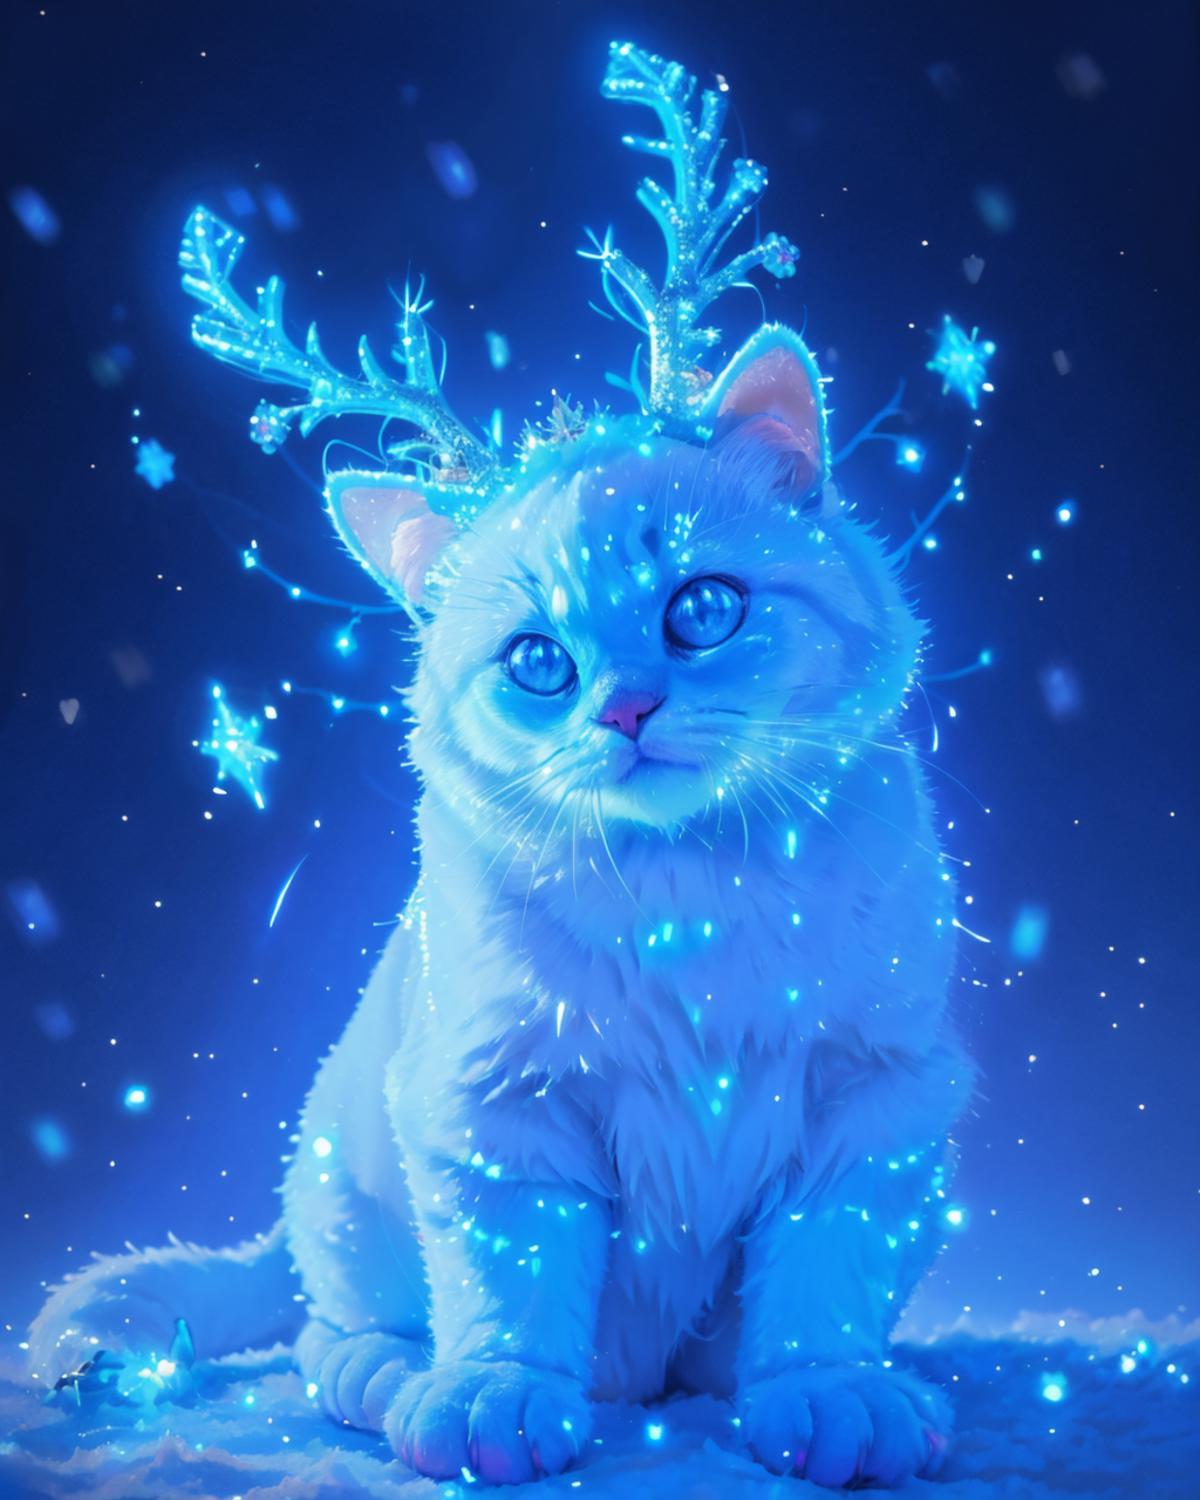 A white cat wearing a festive antlers hat and surrounded by blue sparkles.